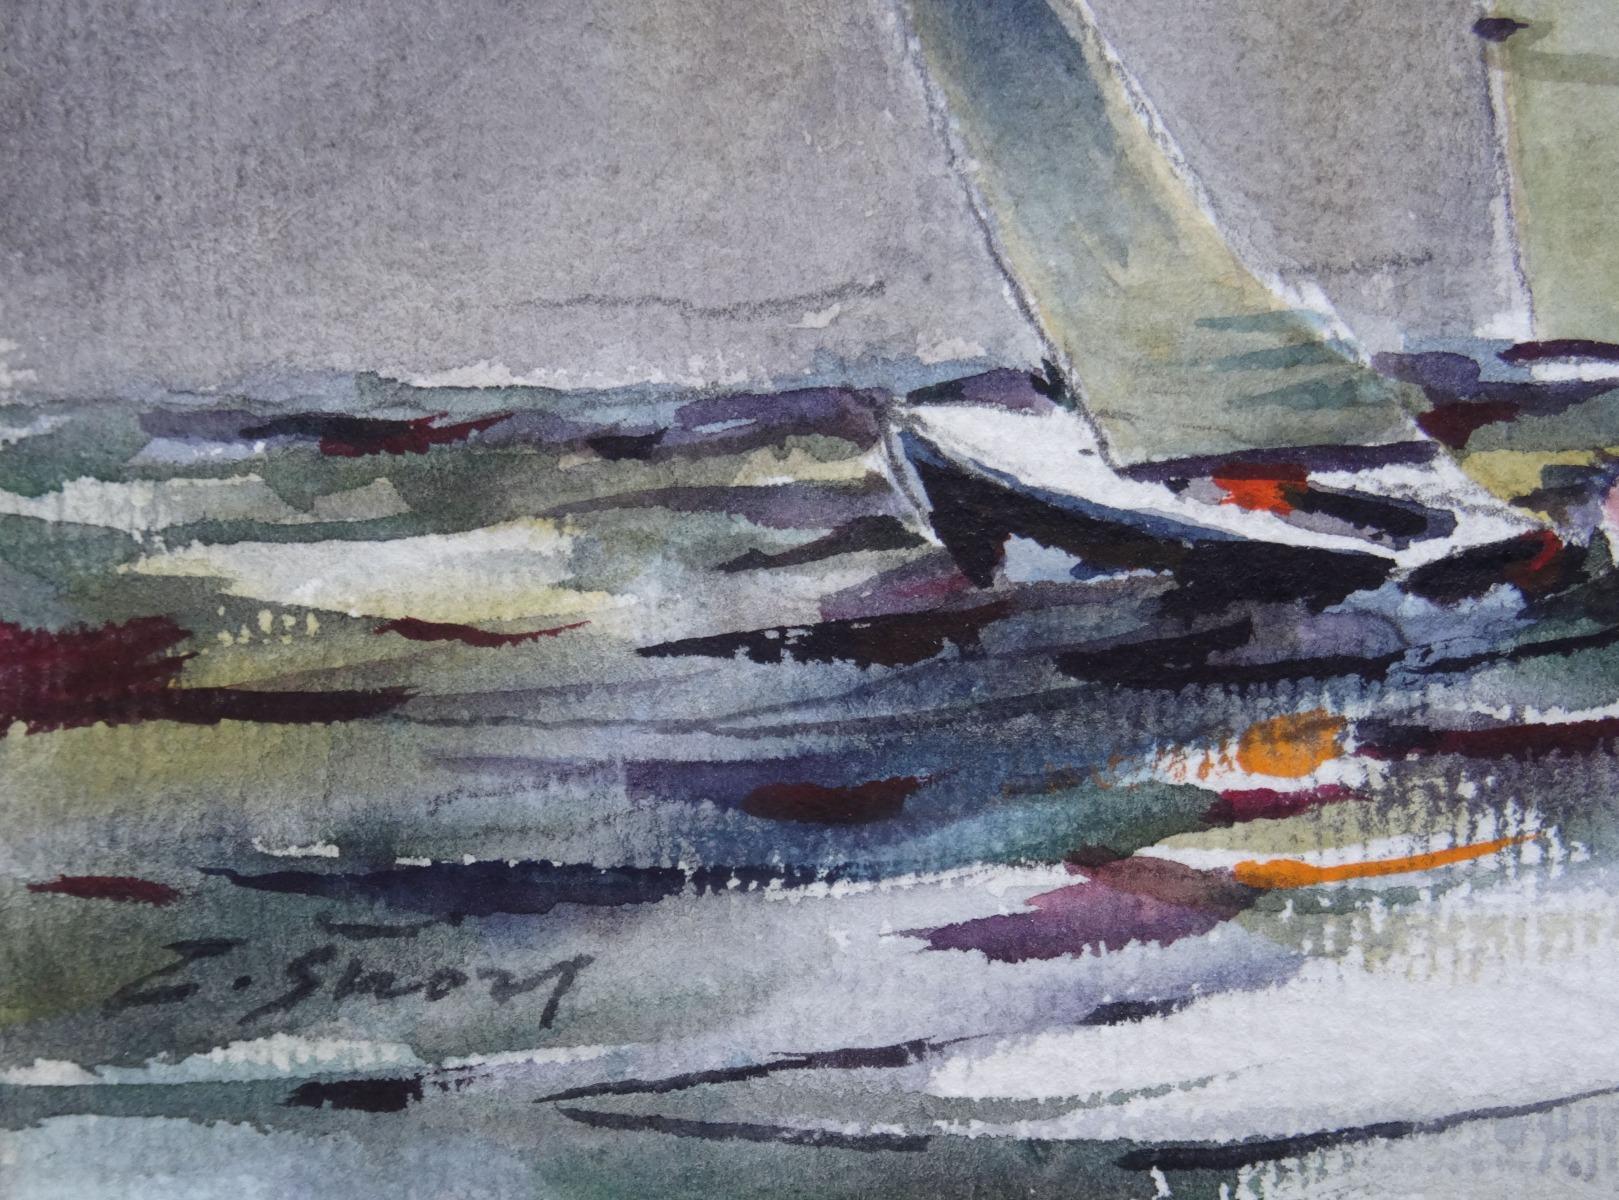 Sailboats. Watercolor on paper, 24x18 cm - Art by Zigmunds Snore 